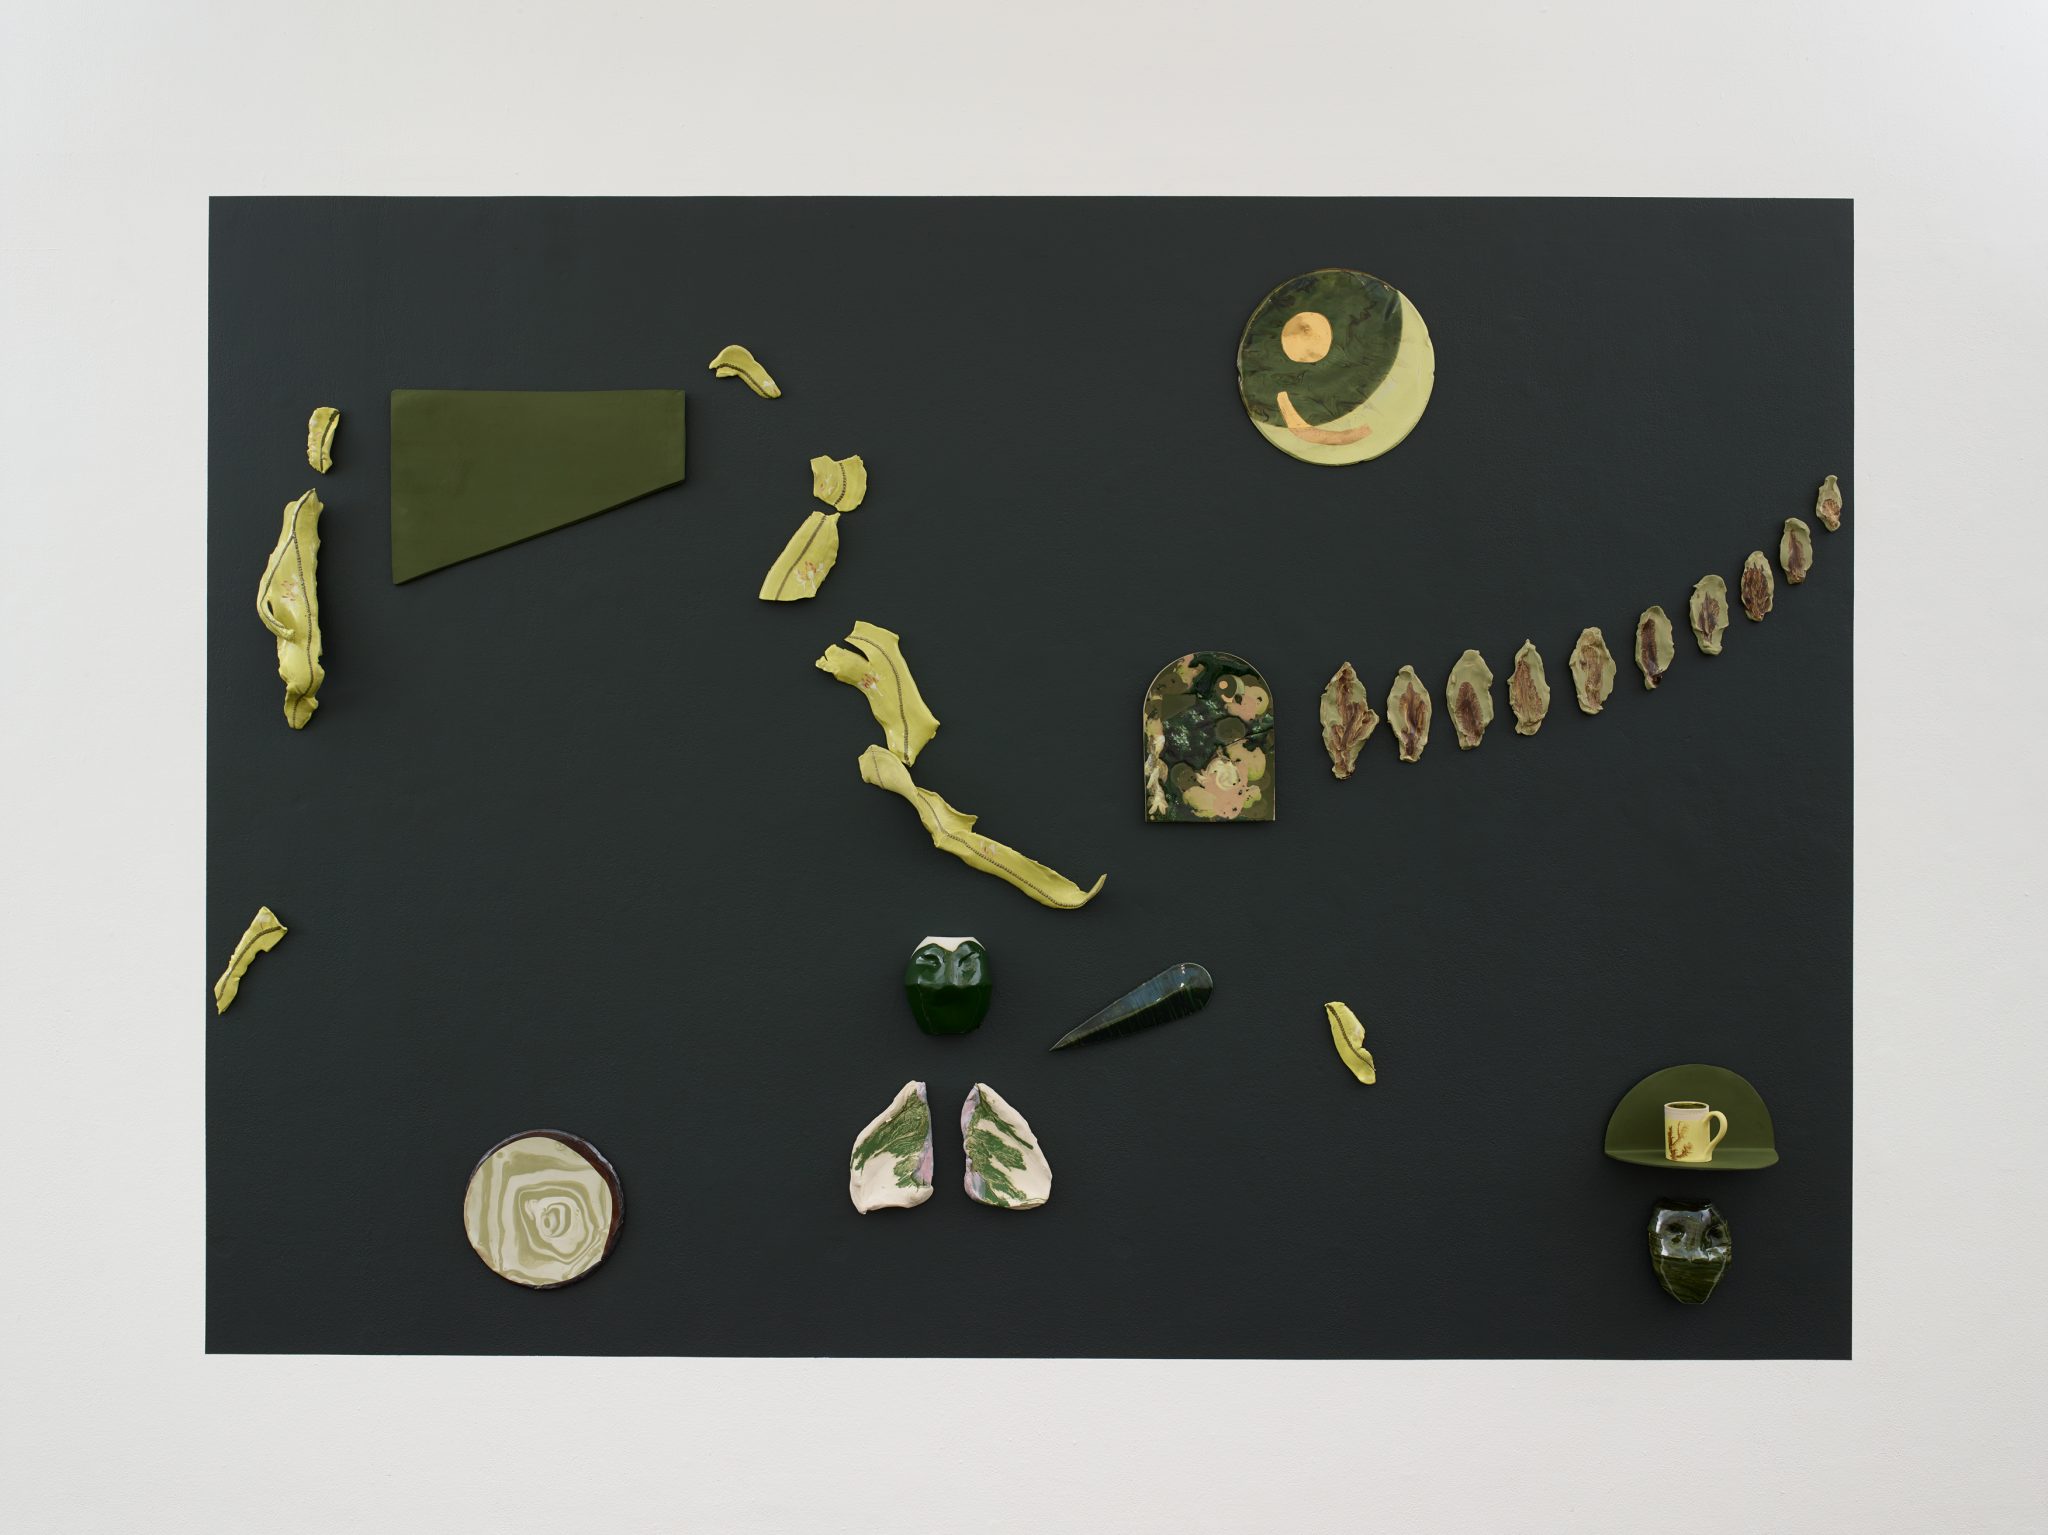 Making all the greens unstable, Jerwood Makers Open, Bethan Lloyd Worthington